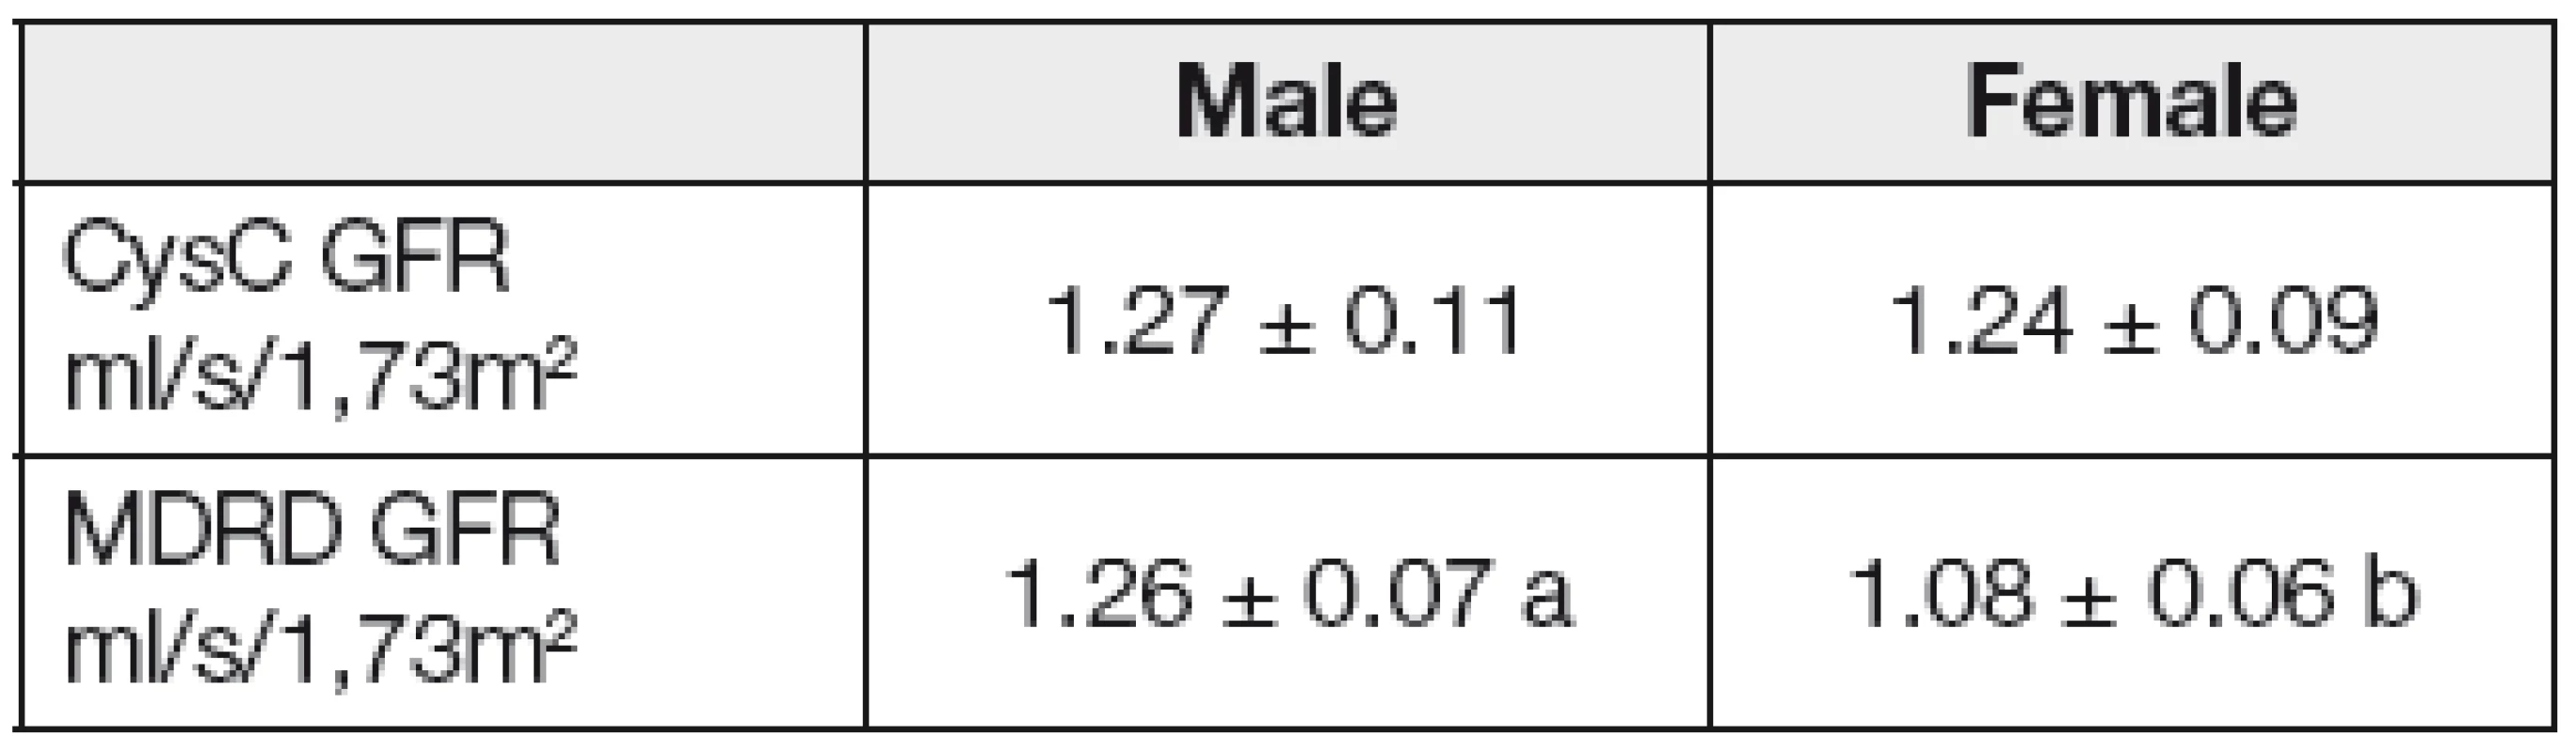 Differences in gender by GFR (LSM ± SD)